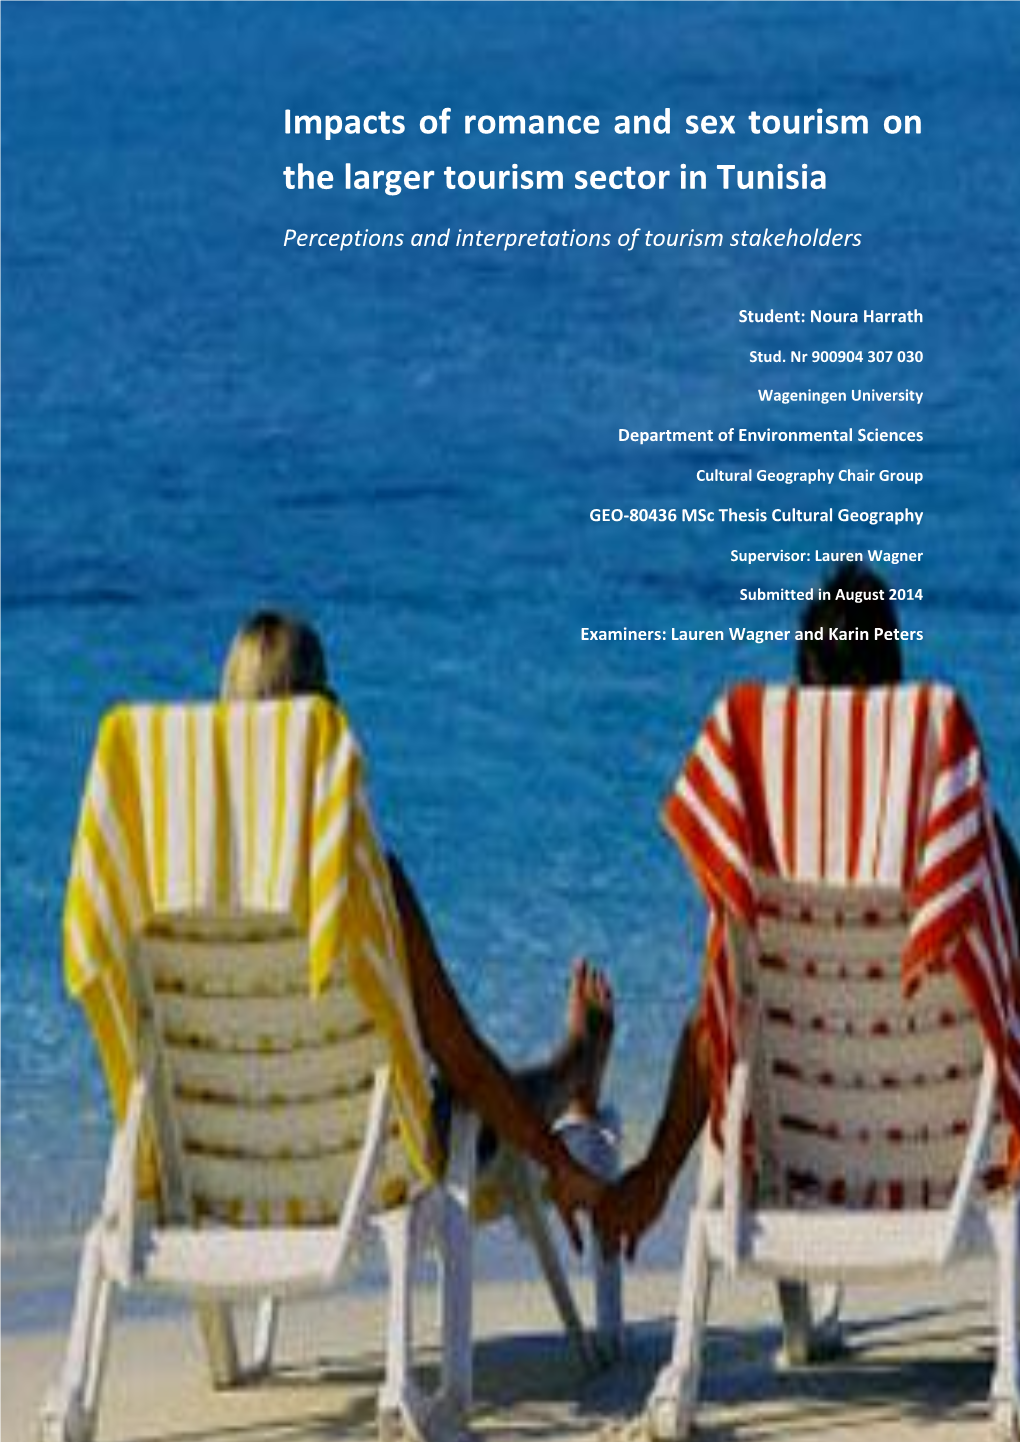 Impacts of Romance and Sex Tourism on the Larger Tourism Sector in Tunisia